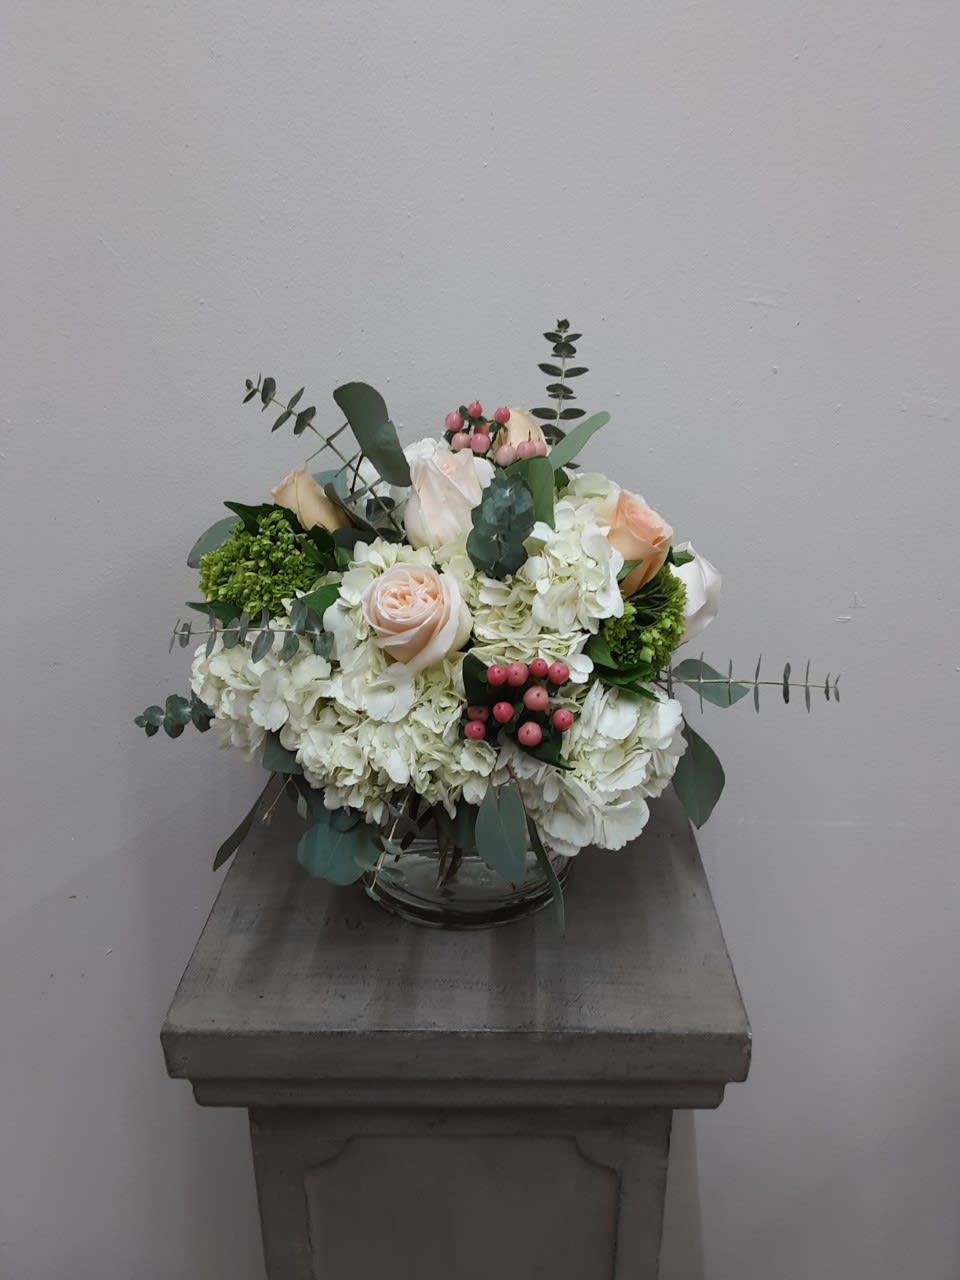 You had me at Hy(drangea) Bouquet - Low arrangement of peach roses, pink hypericum and green hydrangeas on a cloud of white hydrangeas. Eucalyptus adds the perfect touch to this love cylinder arrangement! Such a classy and soft romantic arrangement.  Flowers and colors may vary depending on availability.